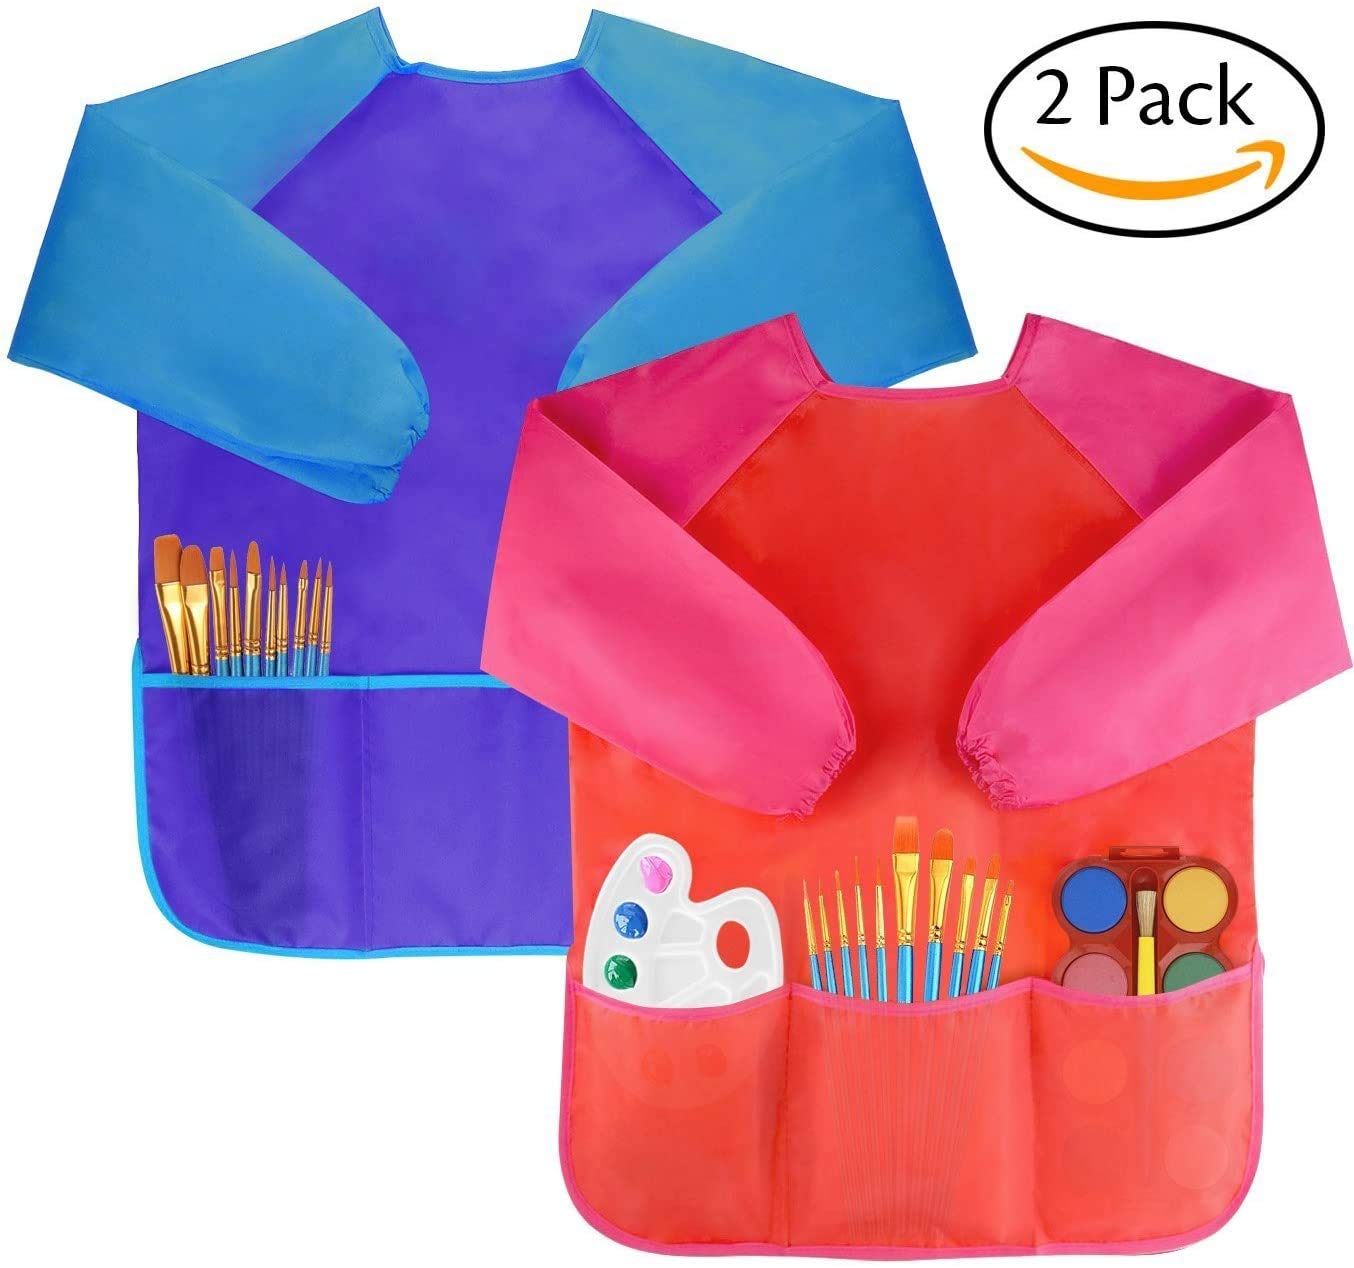 Amaza 2Pcs Kids Art Aprons, Waterproof Children's Artist Painting Smocks with Long Sleeve 3 Pockets for Age 2-8 Years (Blue & Red)